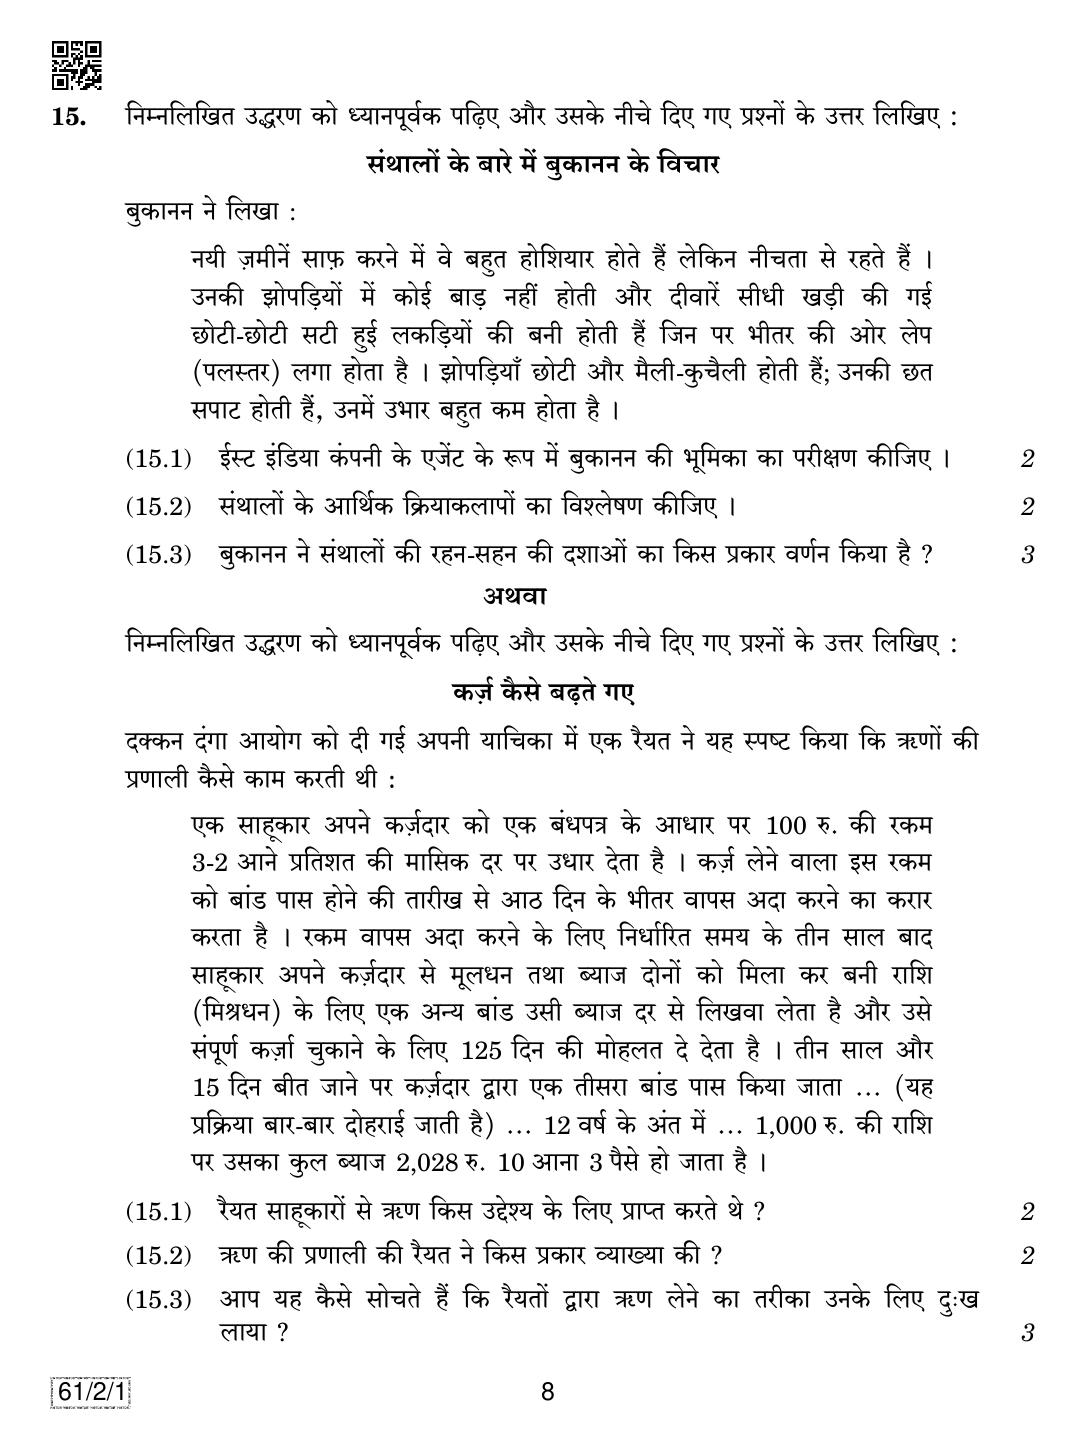 CBSE Class 12 61-2-1 History 2019 Question Paper - Page 8